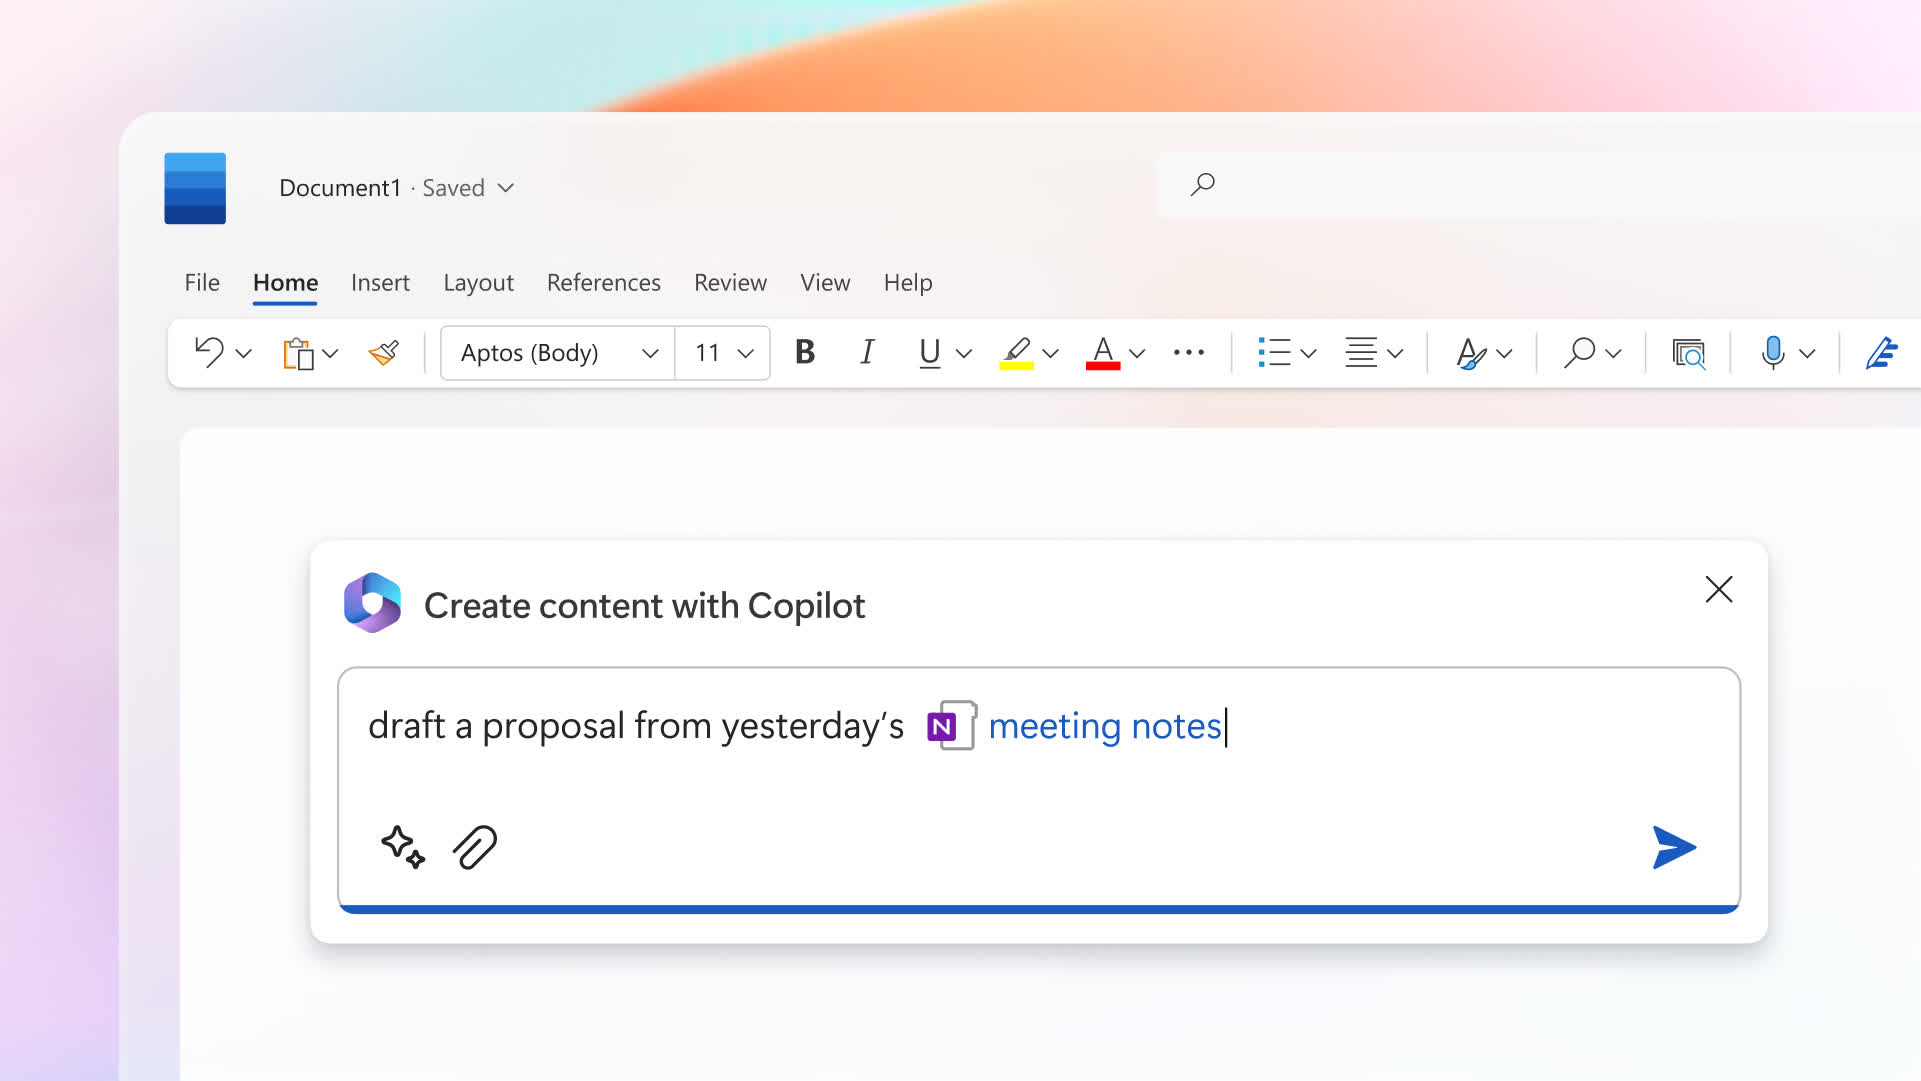 Microsoft Copilot enables next-gen AI for Word, Excel and other Office applications